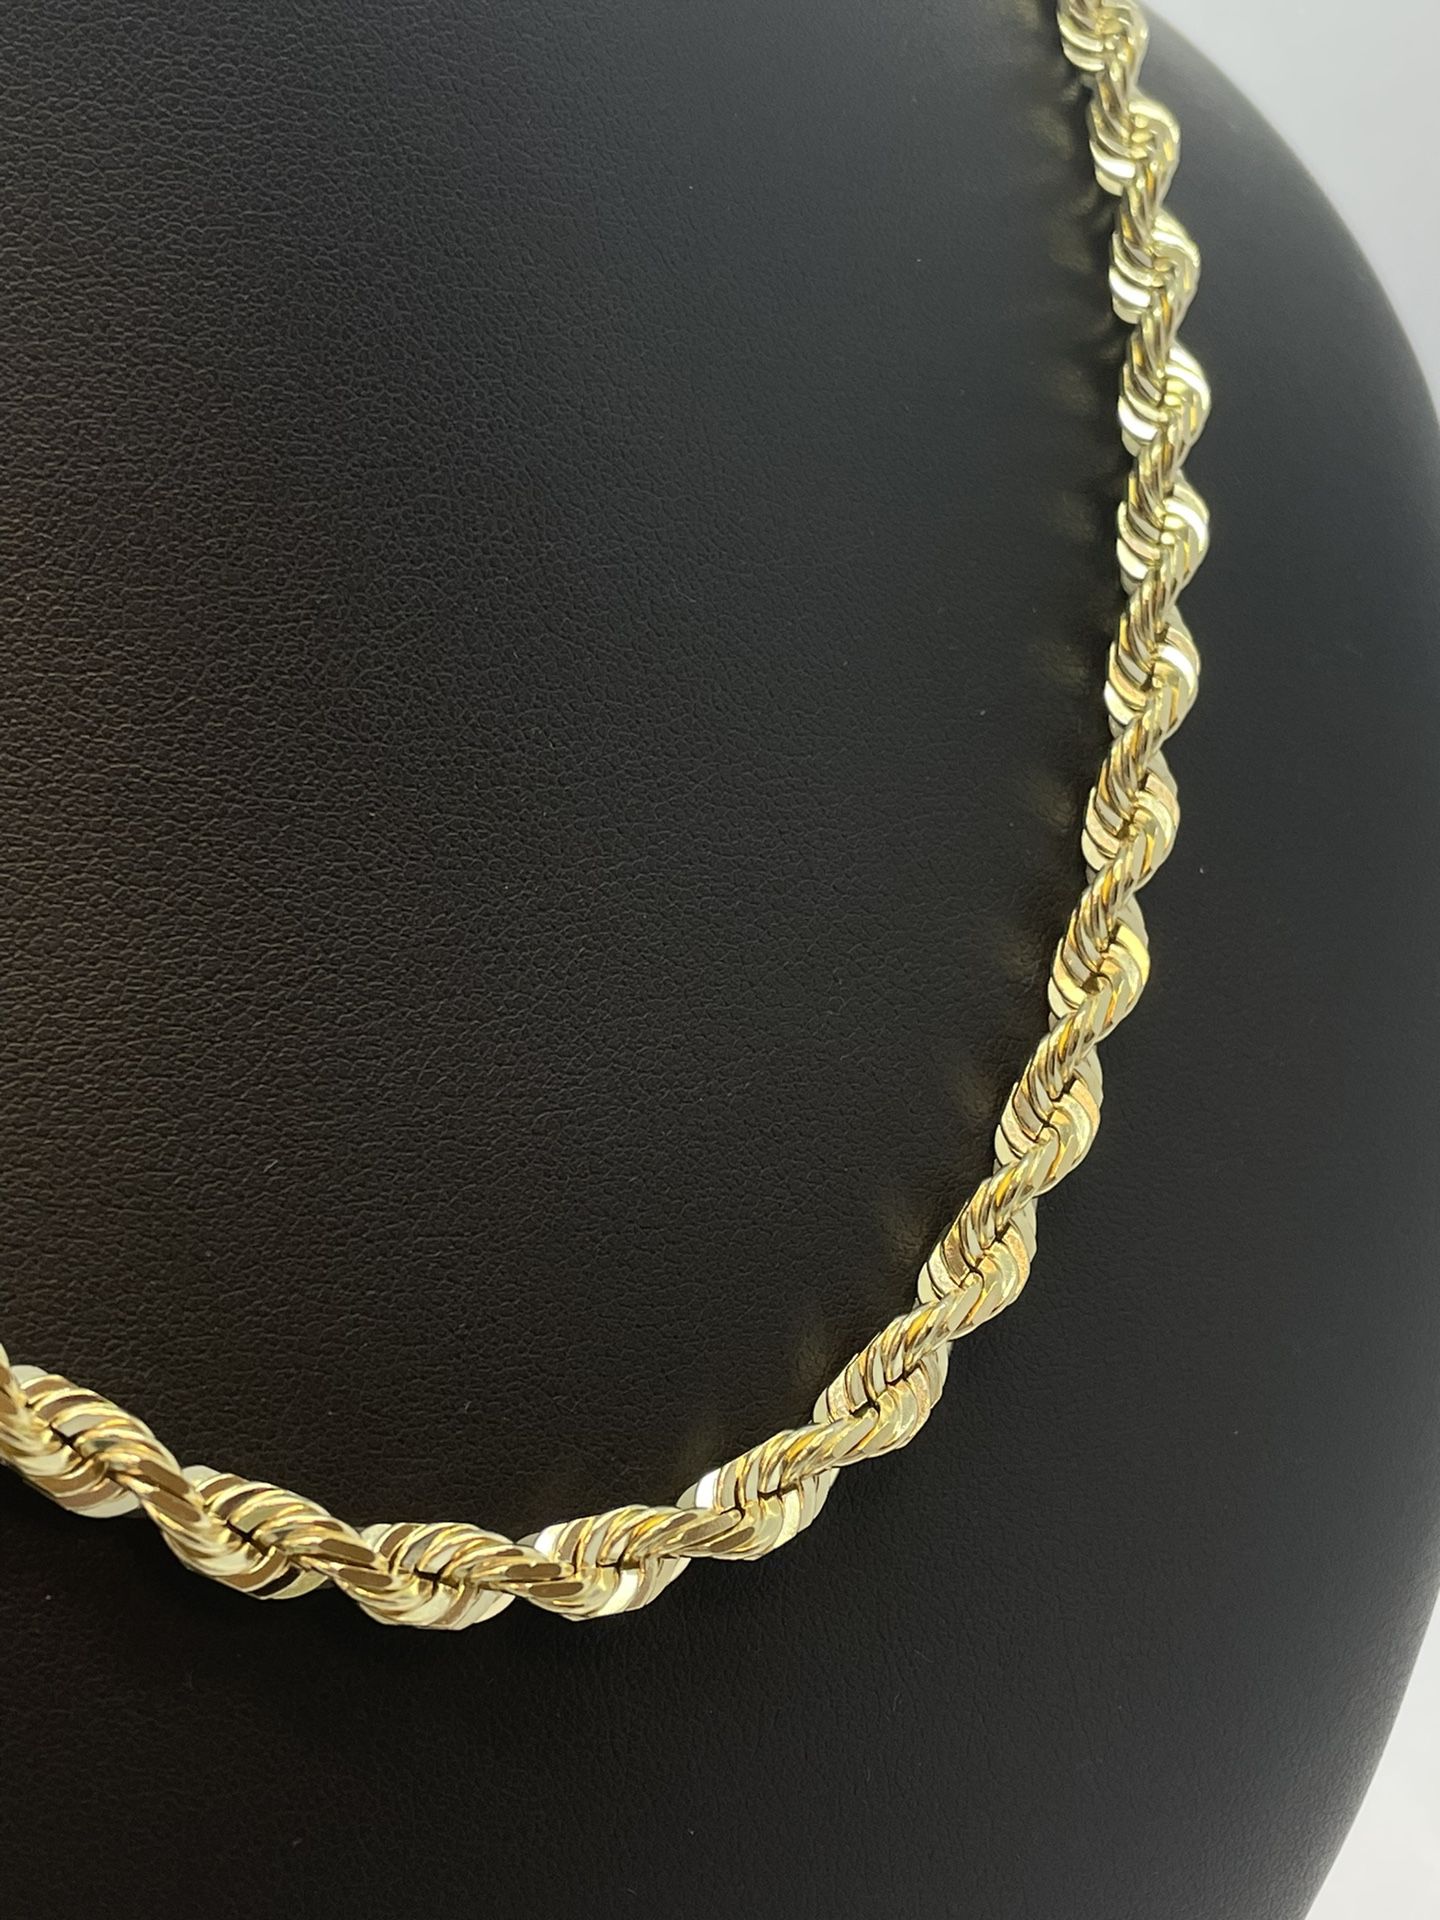 Gold Chain Rope 14K Solid New 